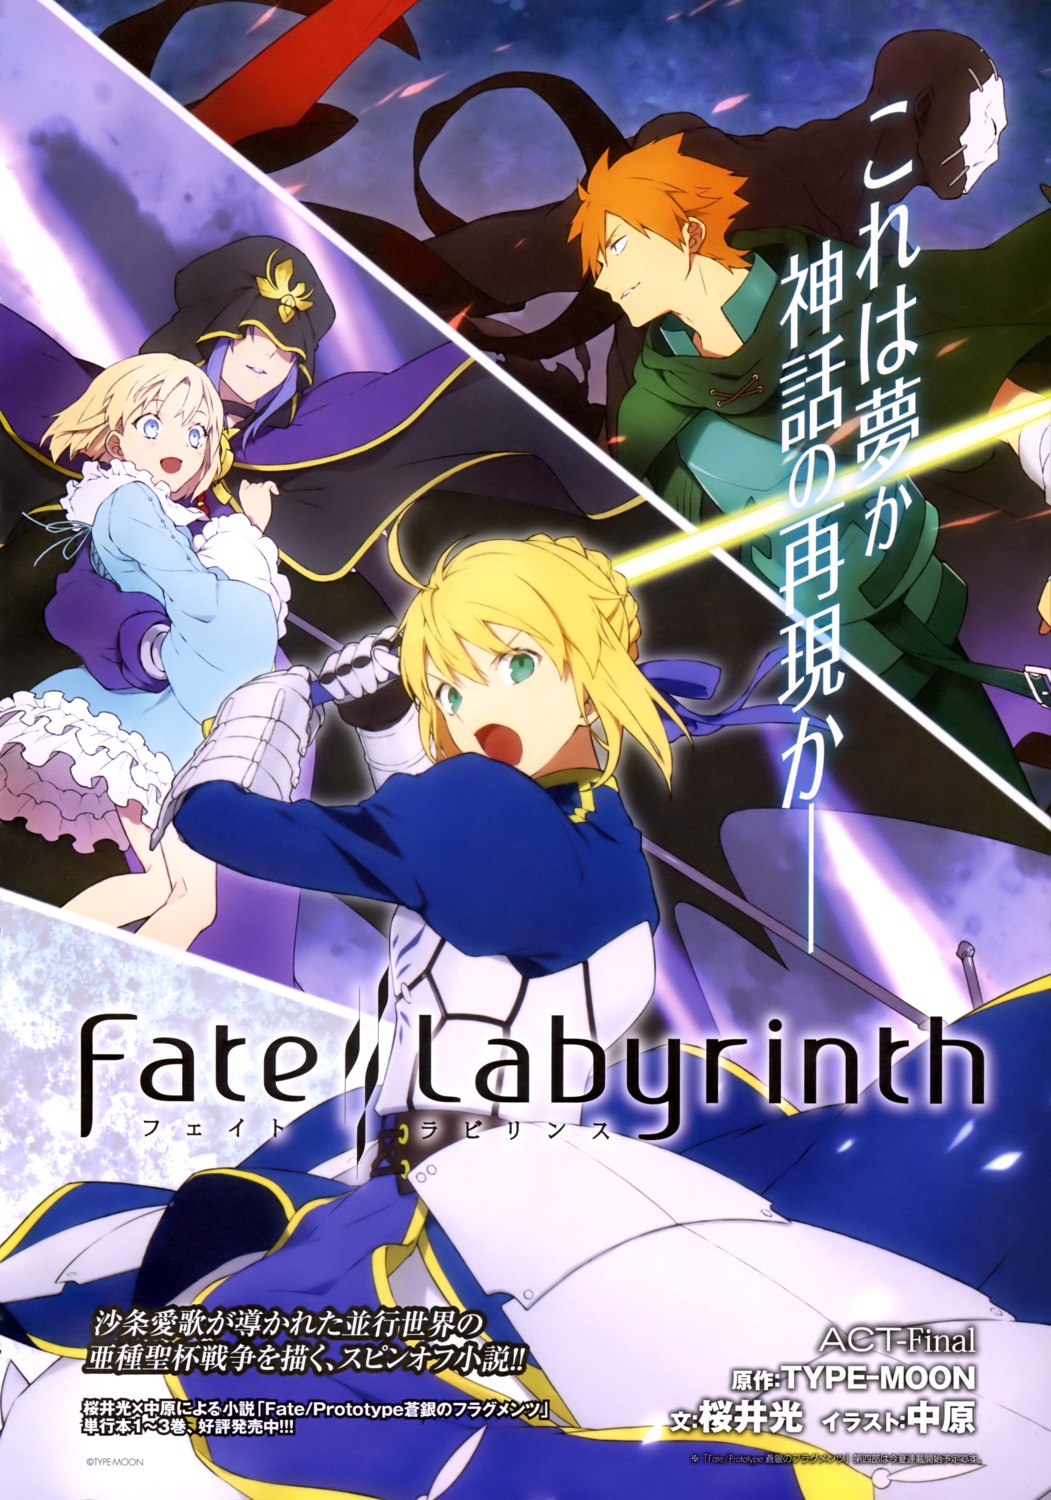 Type Moon Nakahara Fate Labyrinth Fate Prototype Fate Stay Night Archer Assassin Fate Zero Caster Saber Armor Dress Sword 3258 Yande Re